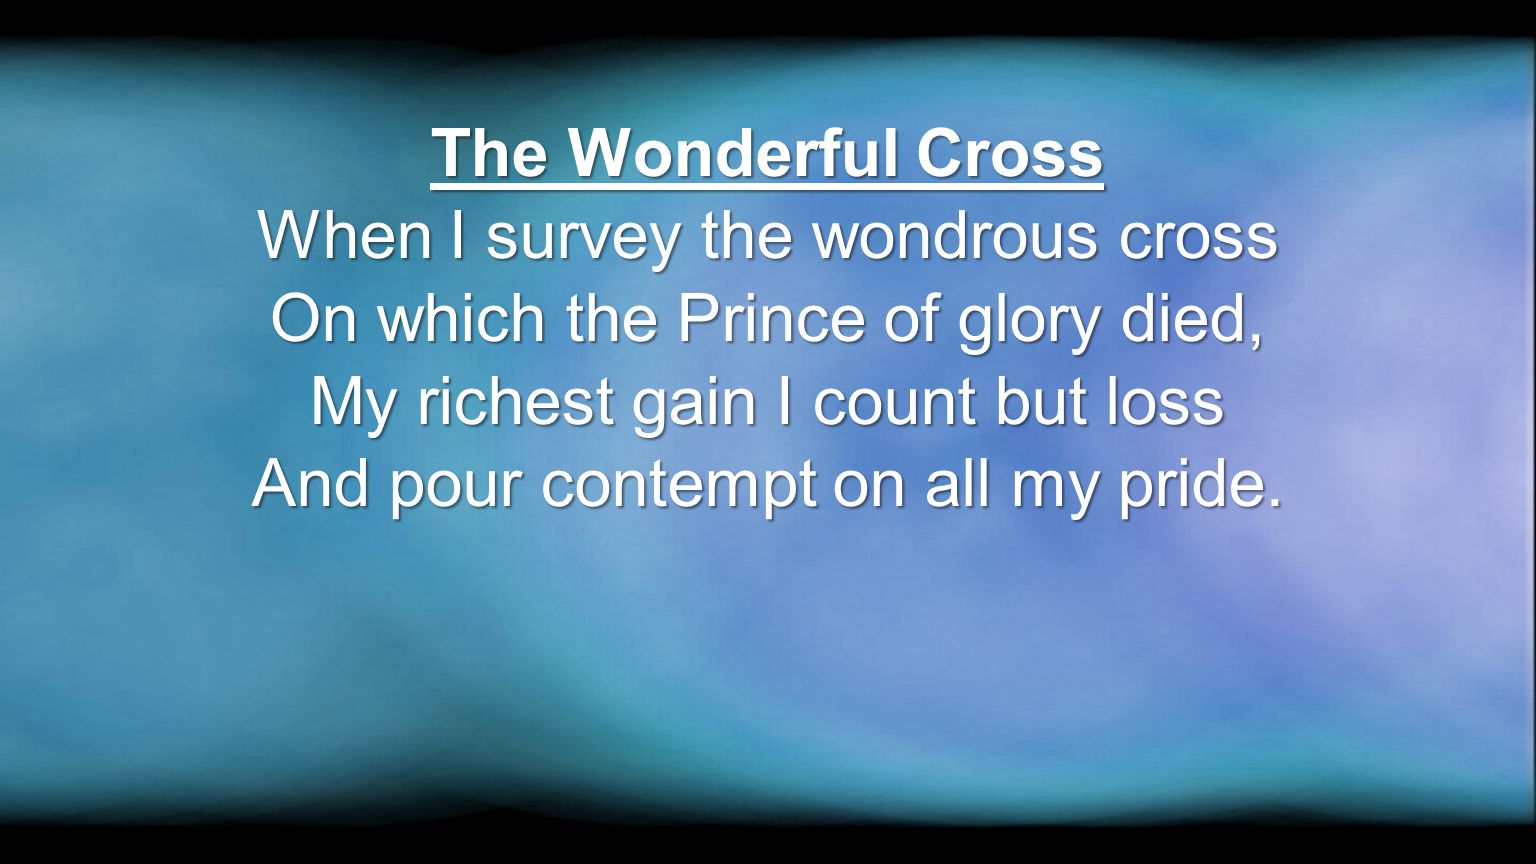 When I survey the wondrous cross On which the Prince of glory died,